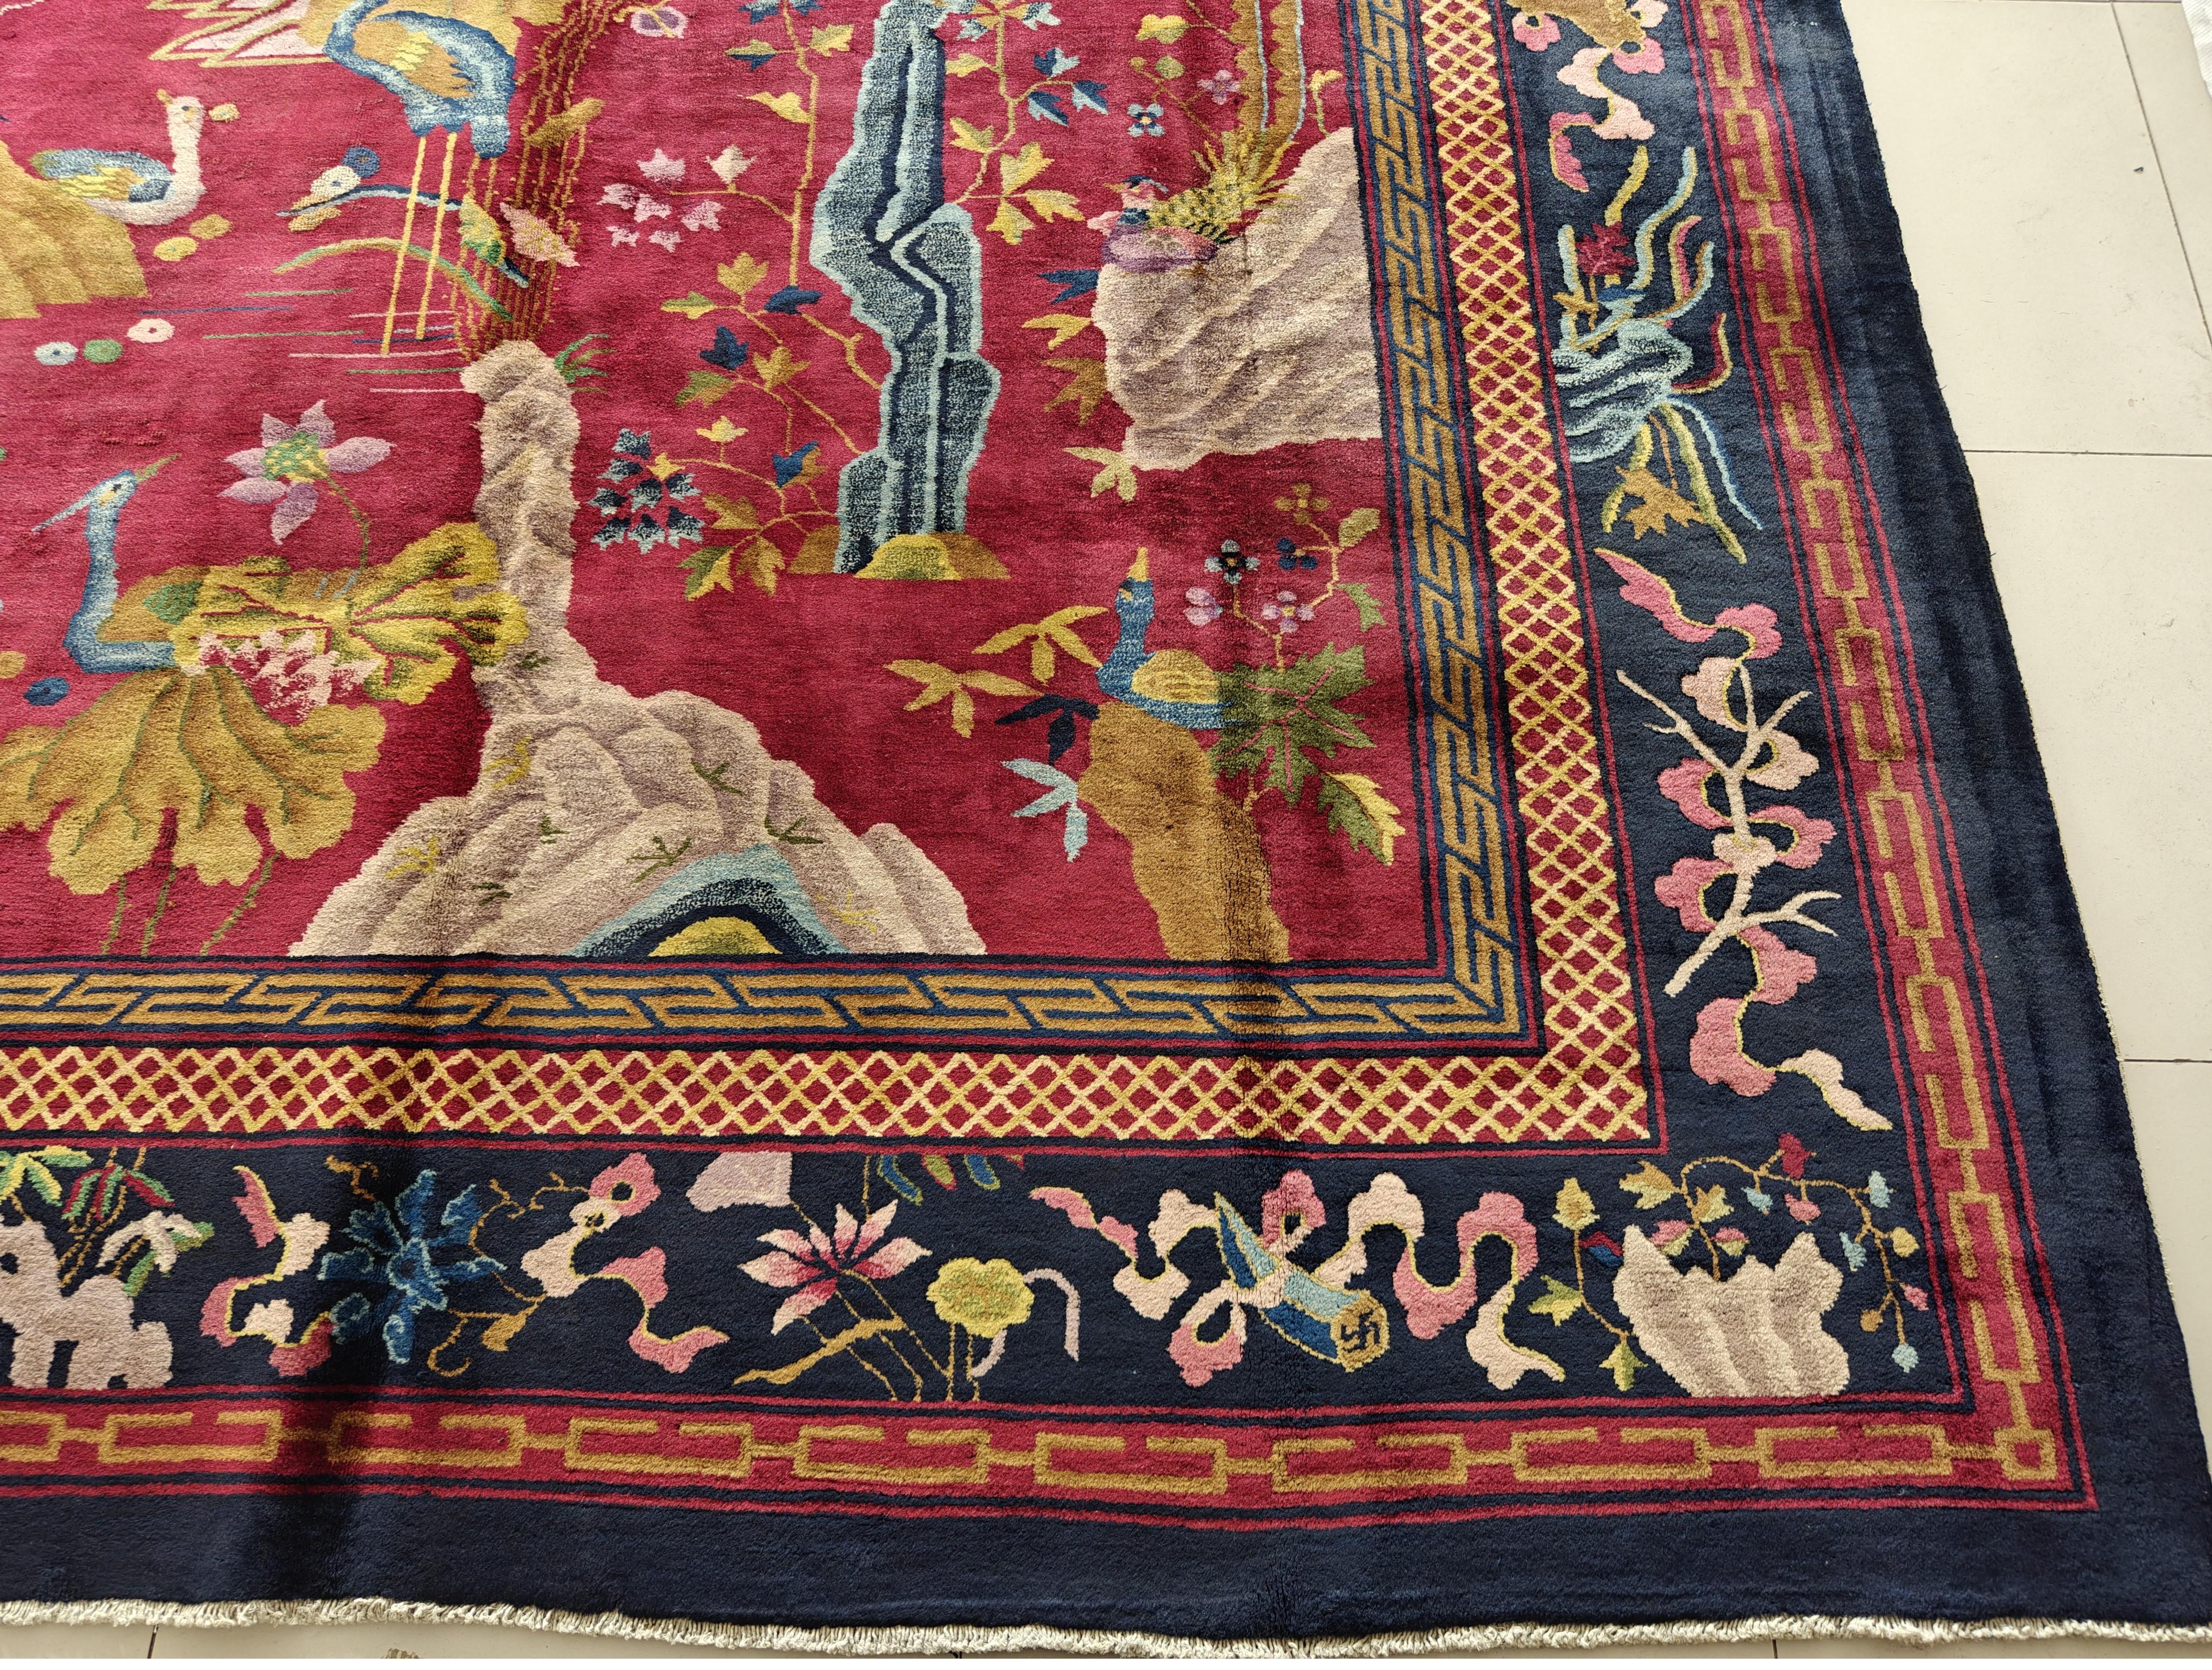 1920s Chinese Art Deco Carpet ( 9' x 14' - 274 x 427 ) For Sale 3